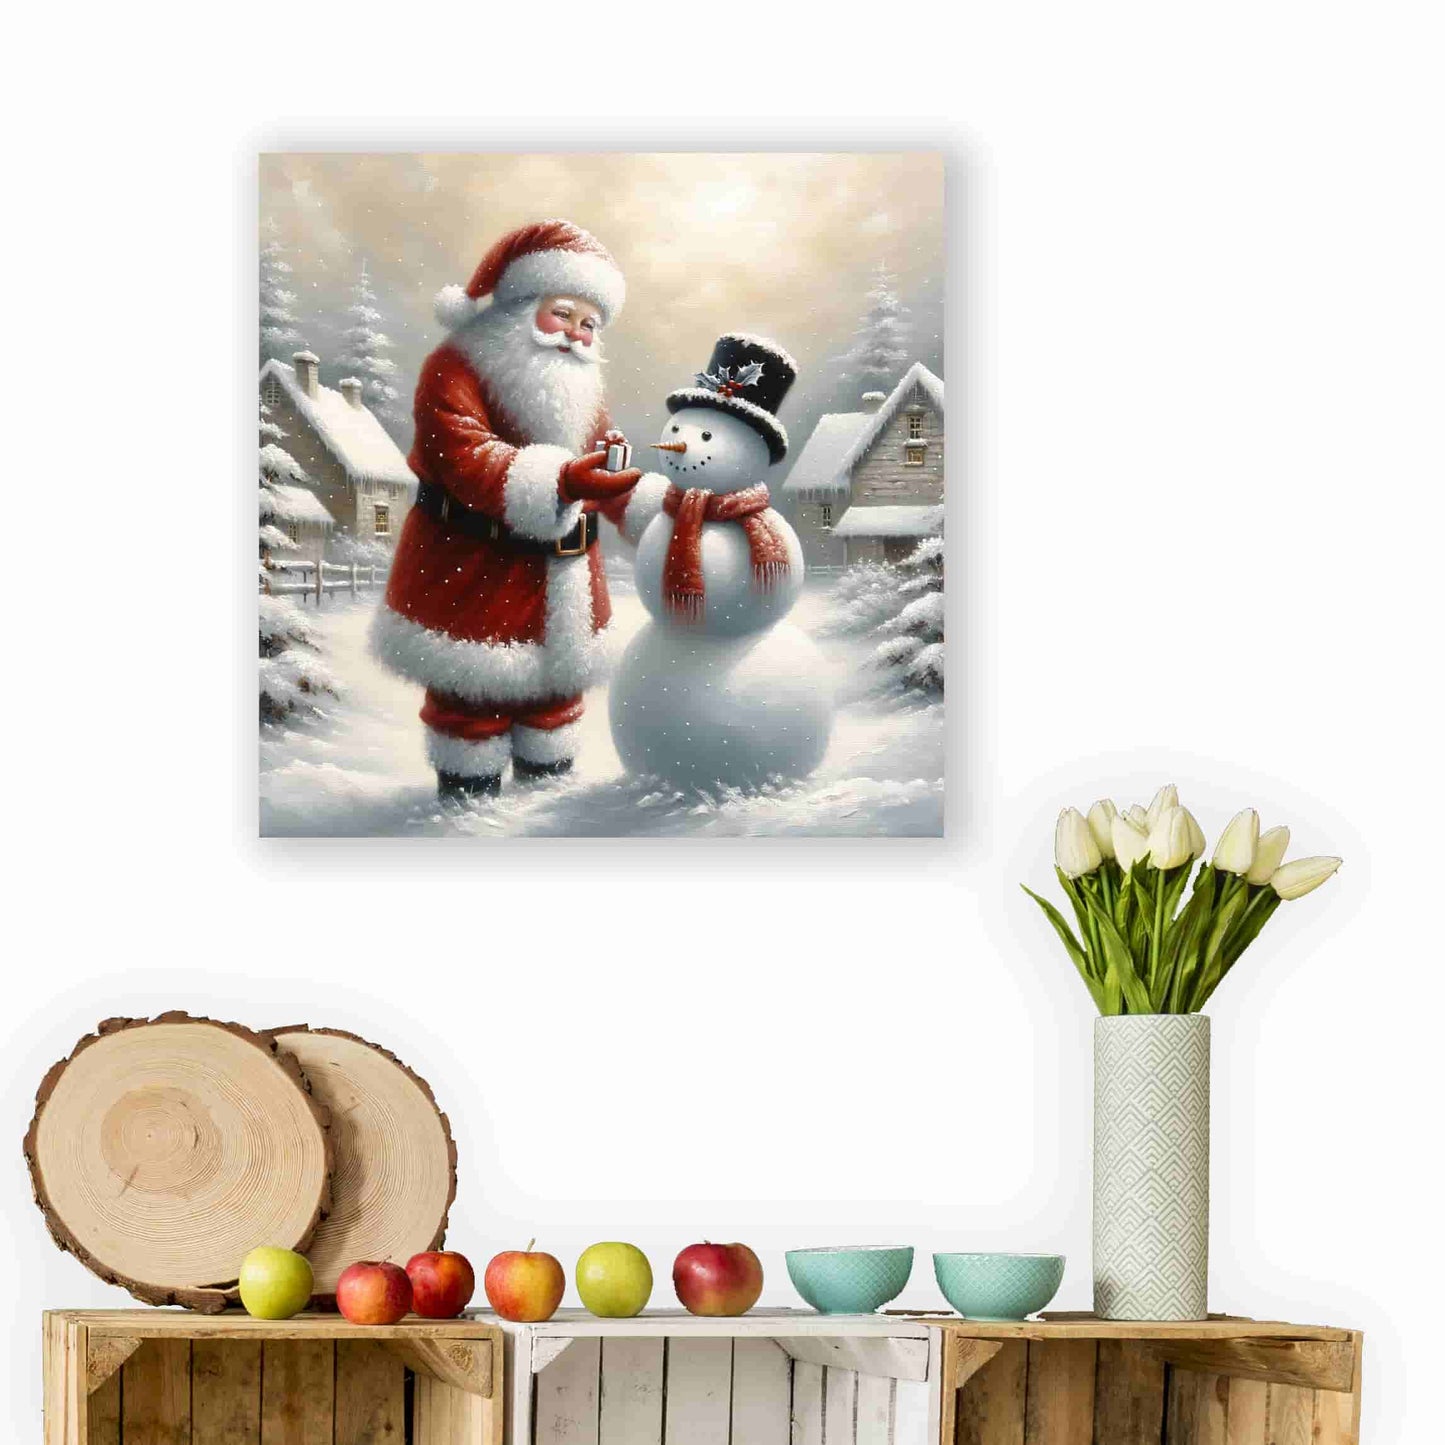 "Gift of Winter Cheer - Santa and Snowman's Gentle Moment" Wrapped Canvas wall art Prints